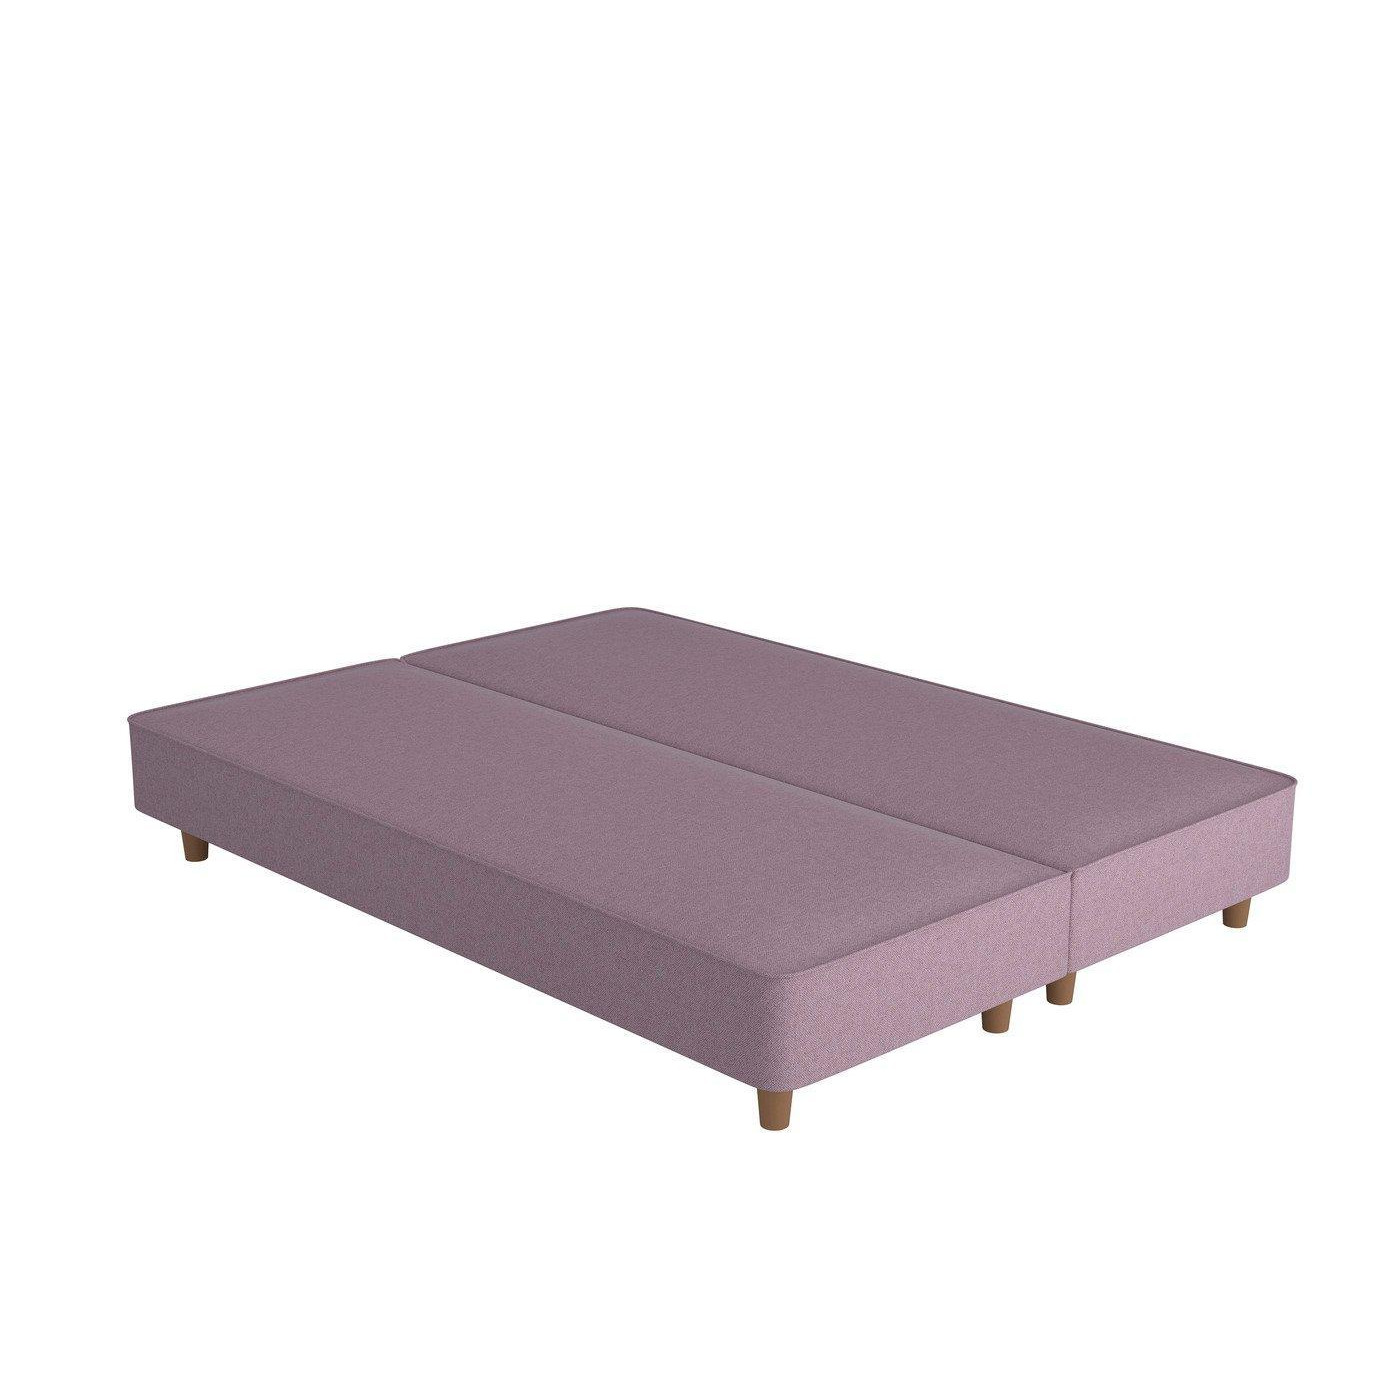 Flaxby Shallow Divan Bed Base - 4'6 Double - Purple